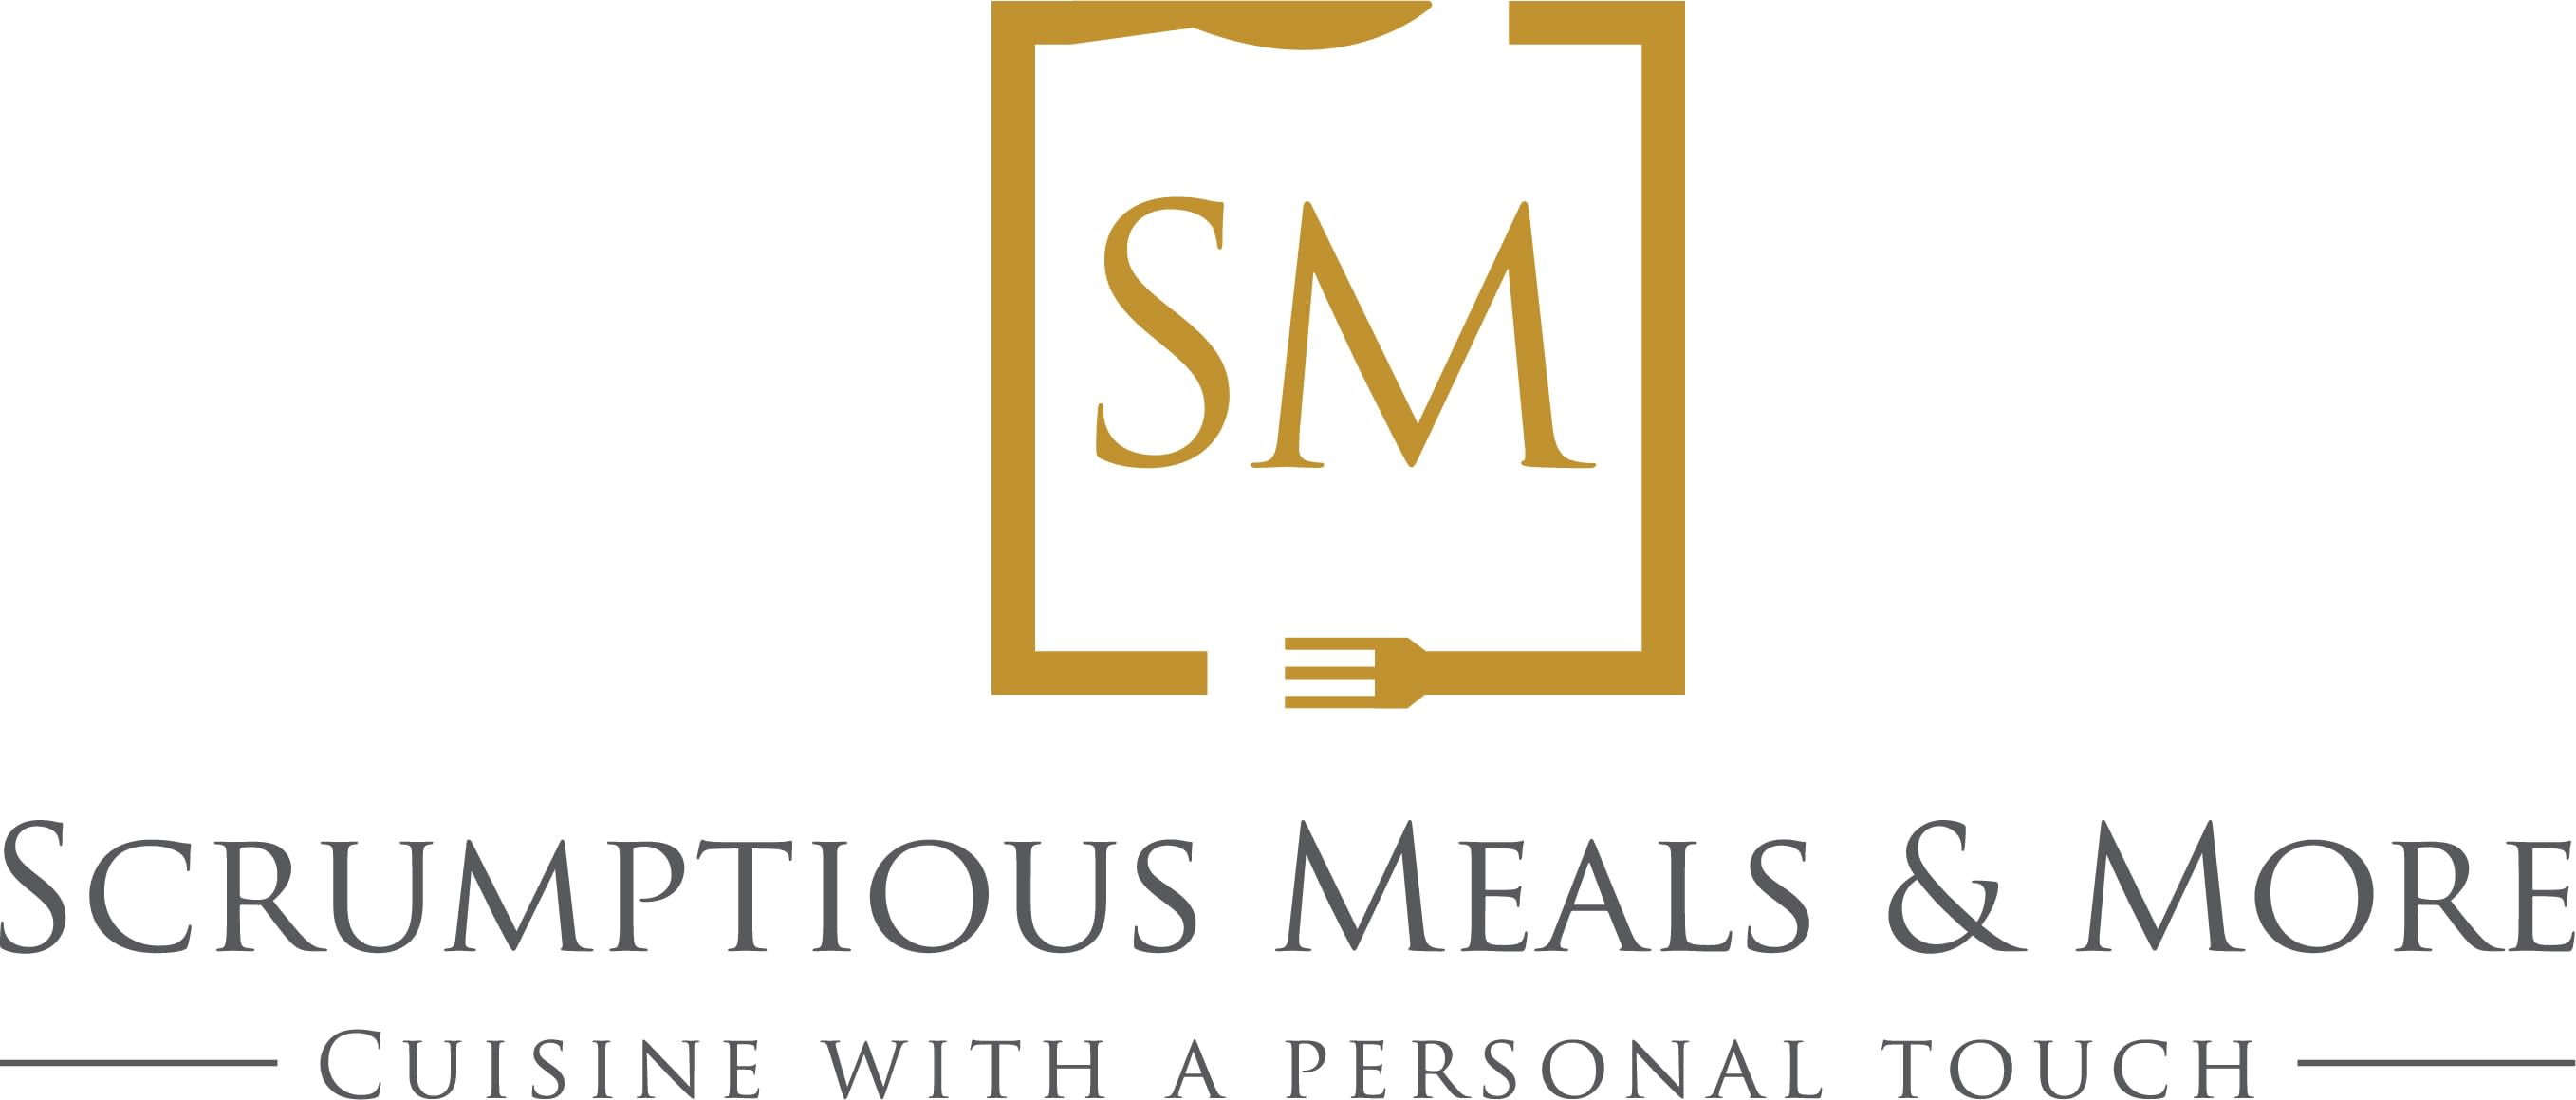 Scrumptious Meals & More Caterers